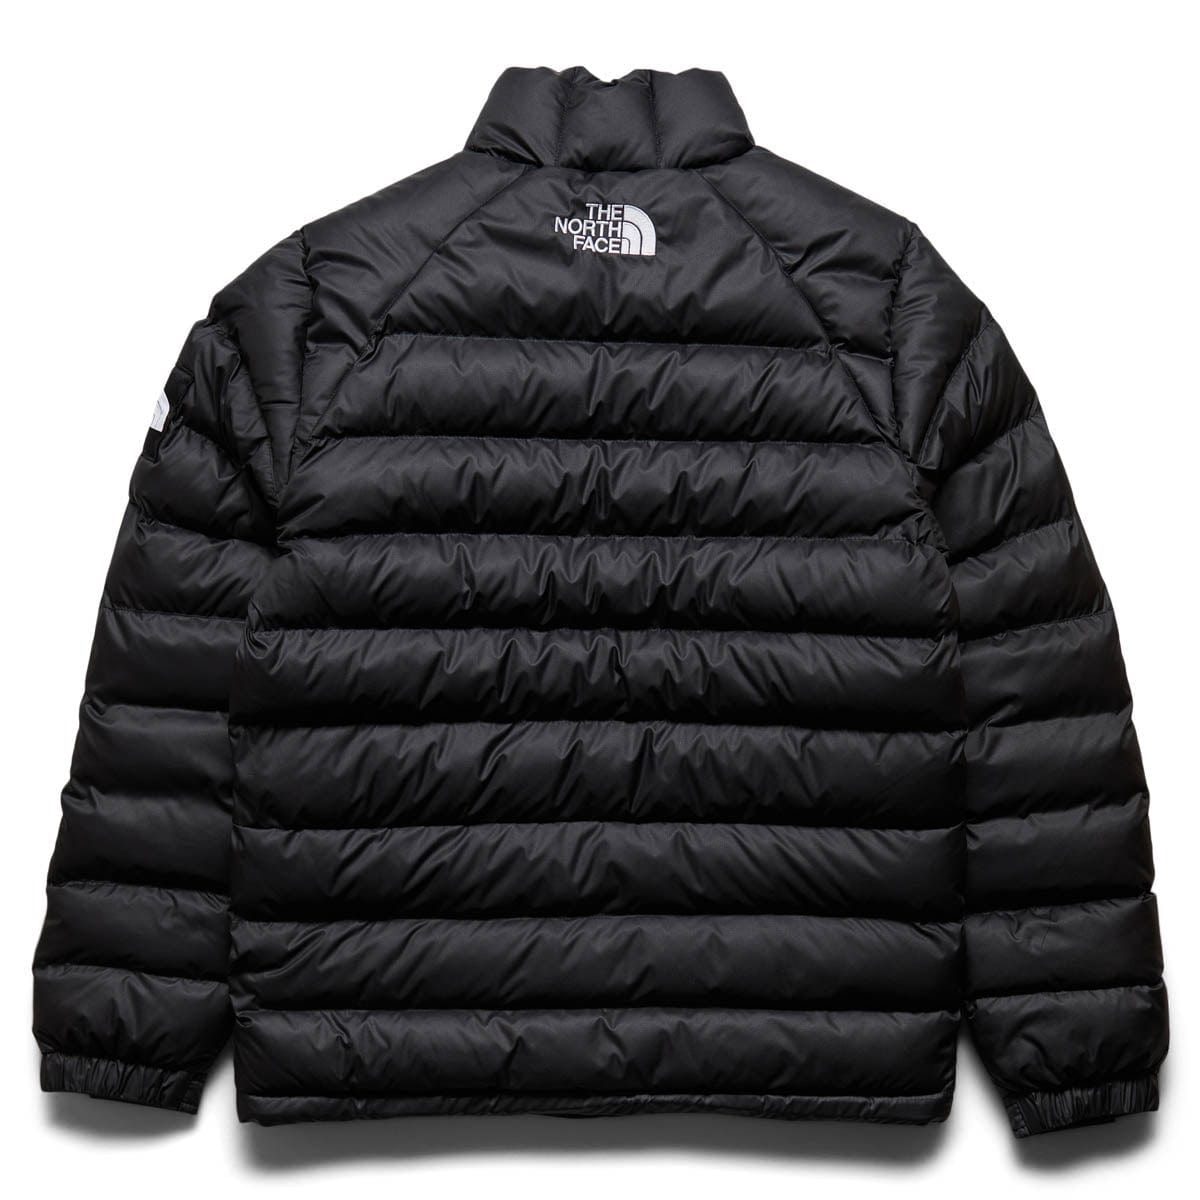 The North Face Outerwear MEN'S PHLEGO SYNTH INS JACKET